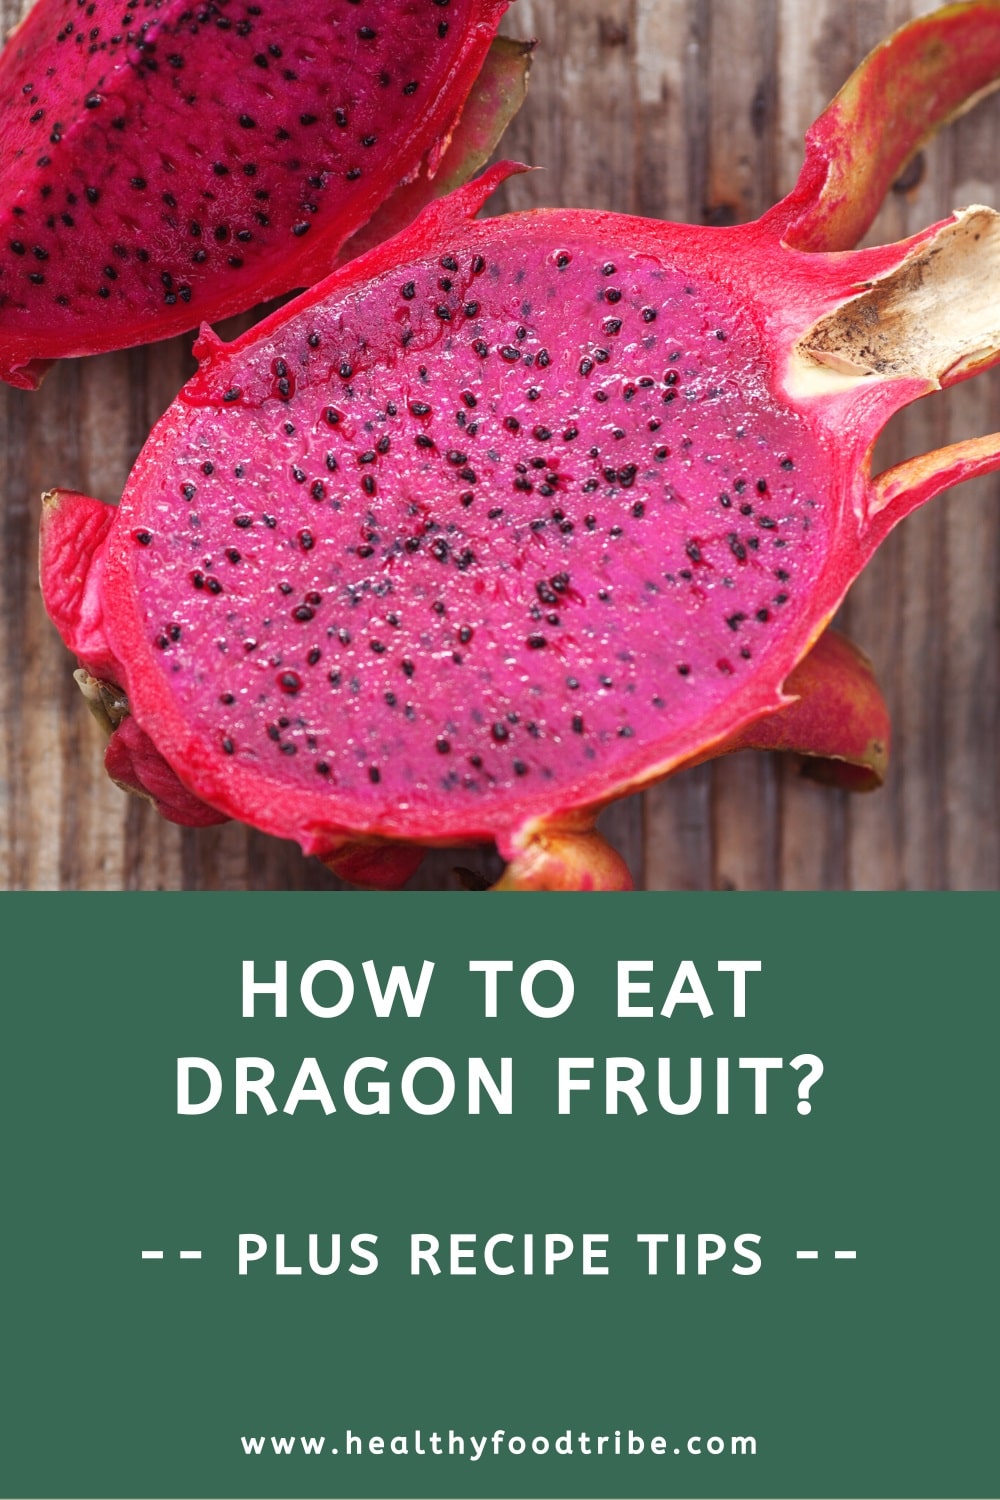 How to a eat dragon fruit (plus recipe tips)